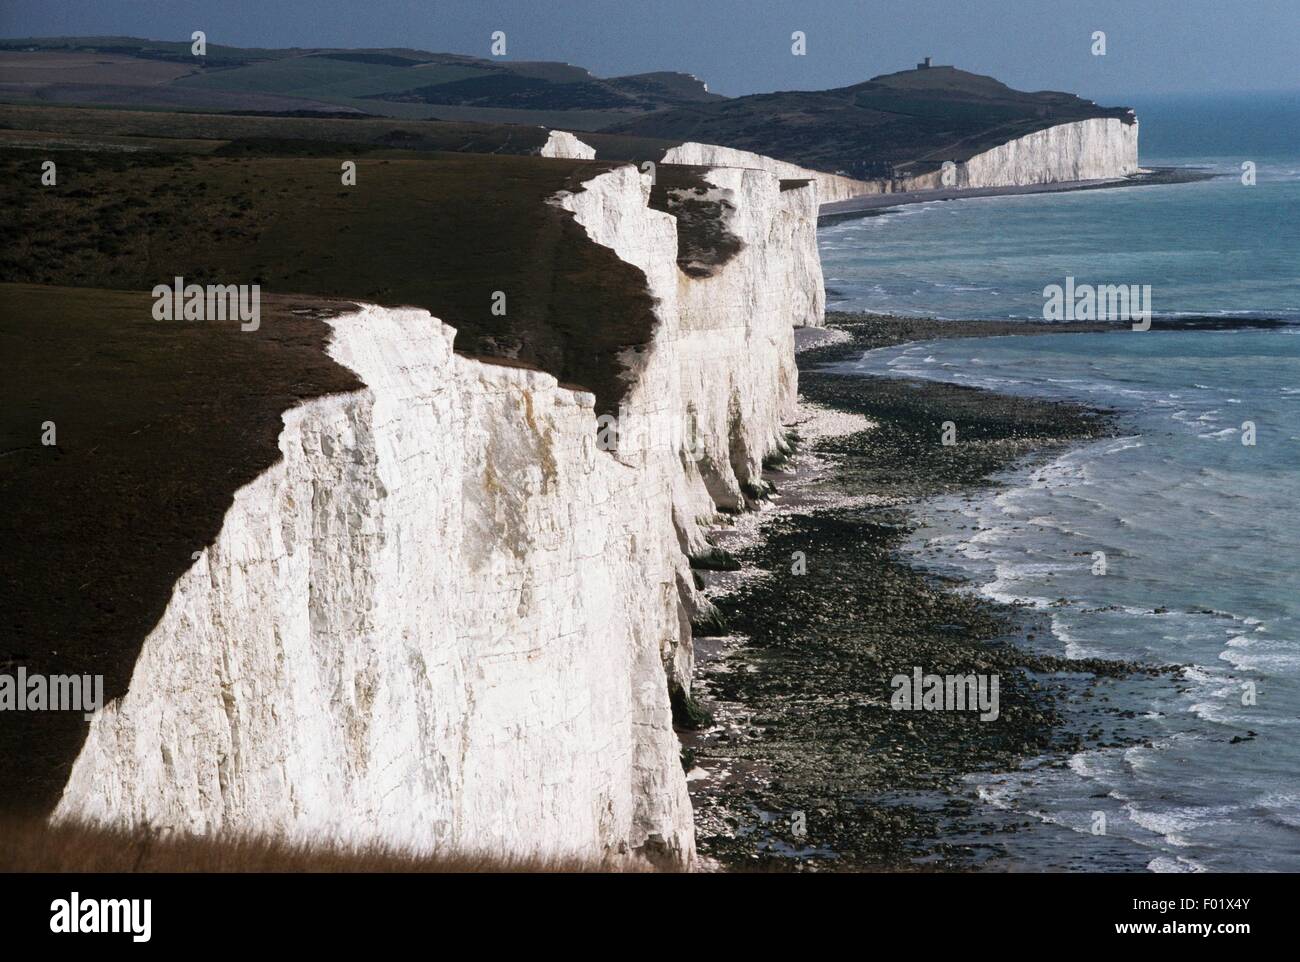 The Seven Sisters, a series of limestone cliffs overlooking the English Channel in the area of Dover, Kent county, United Kingdom. Stock Photo